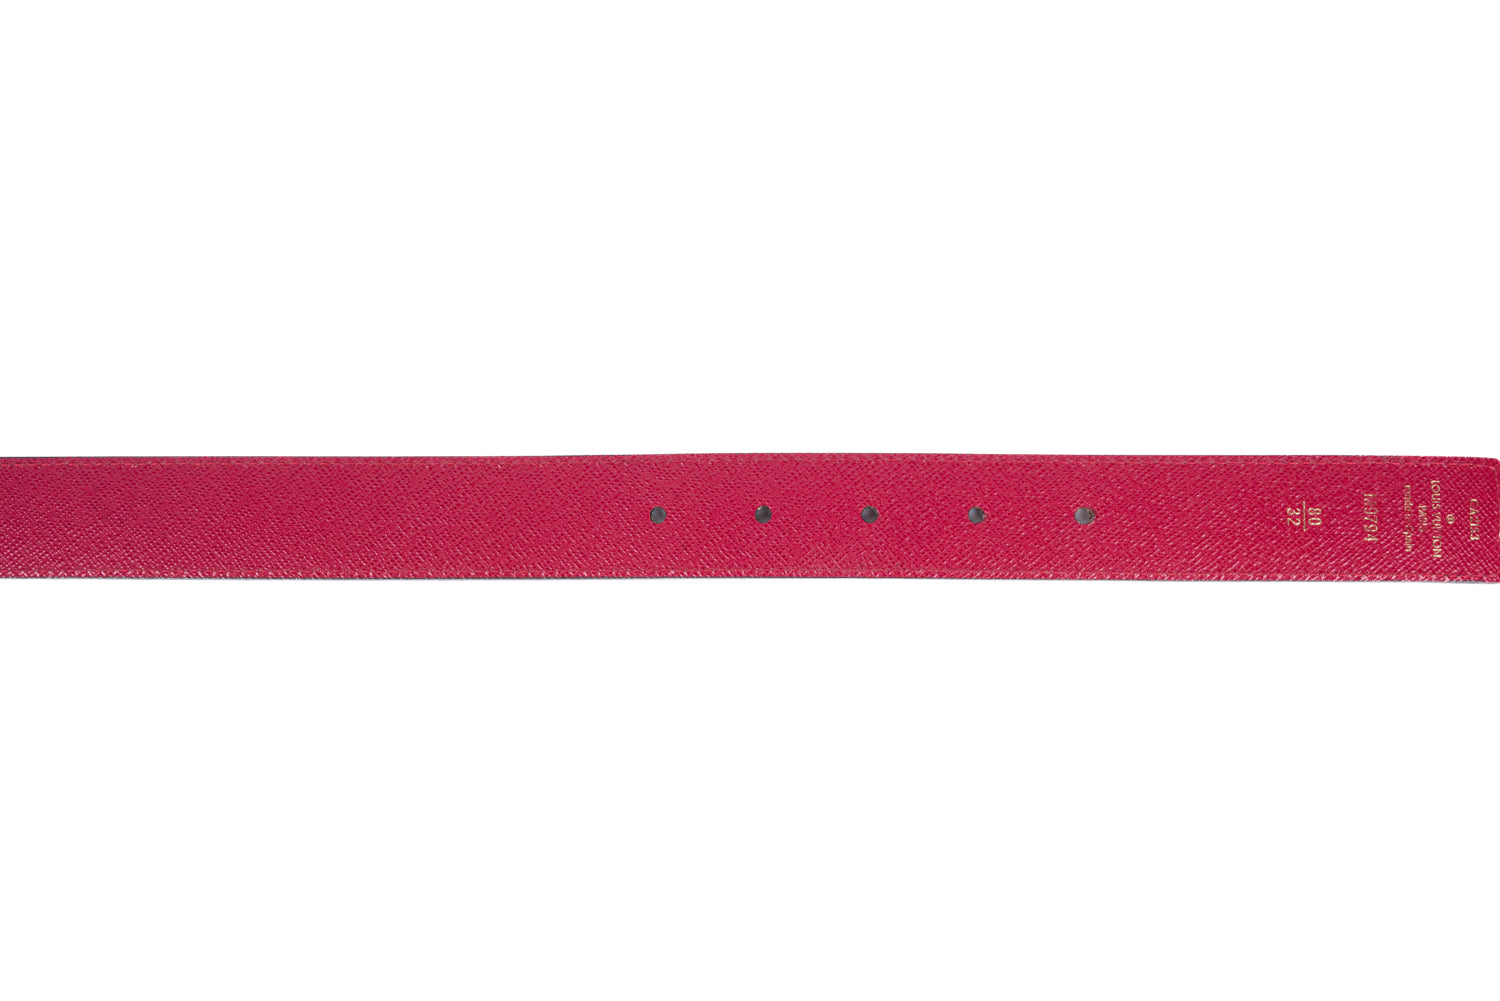 Pink Monogram Canvas and Leather Initiales Reversible Belt